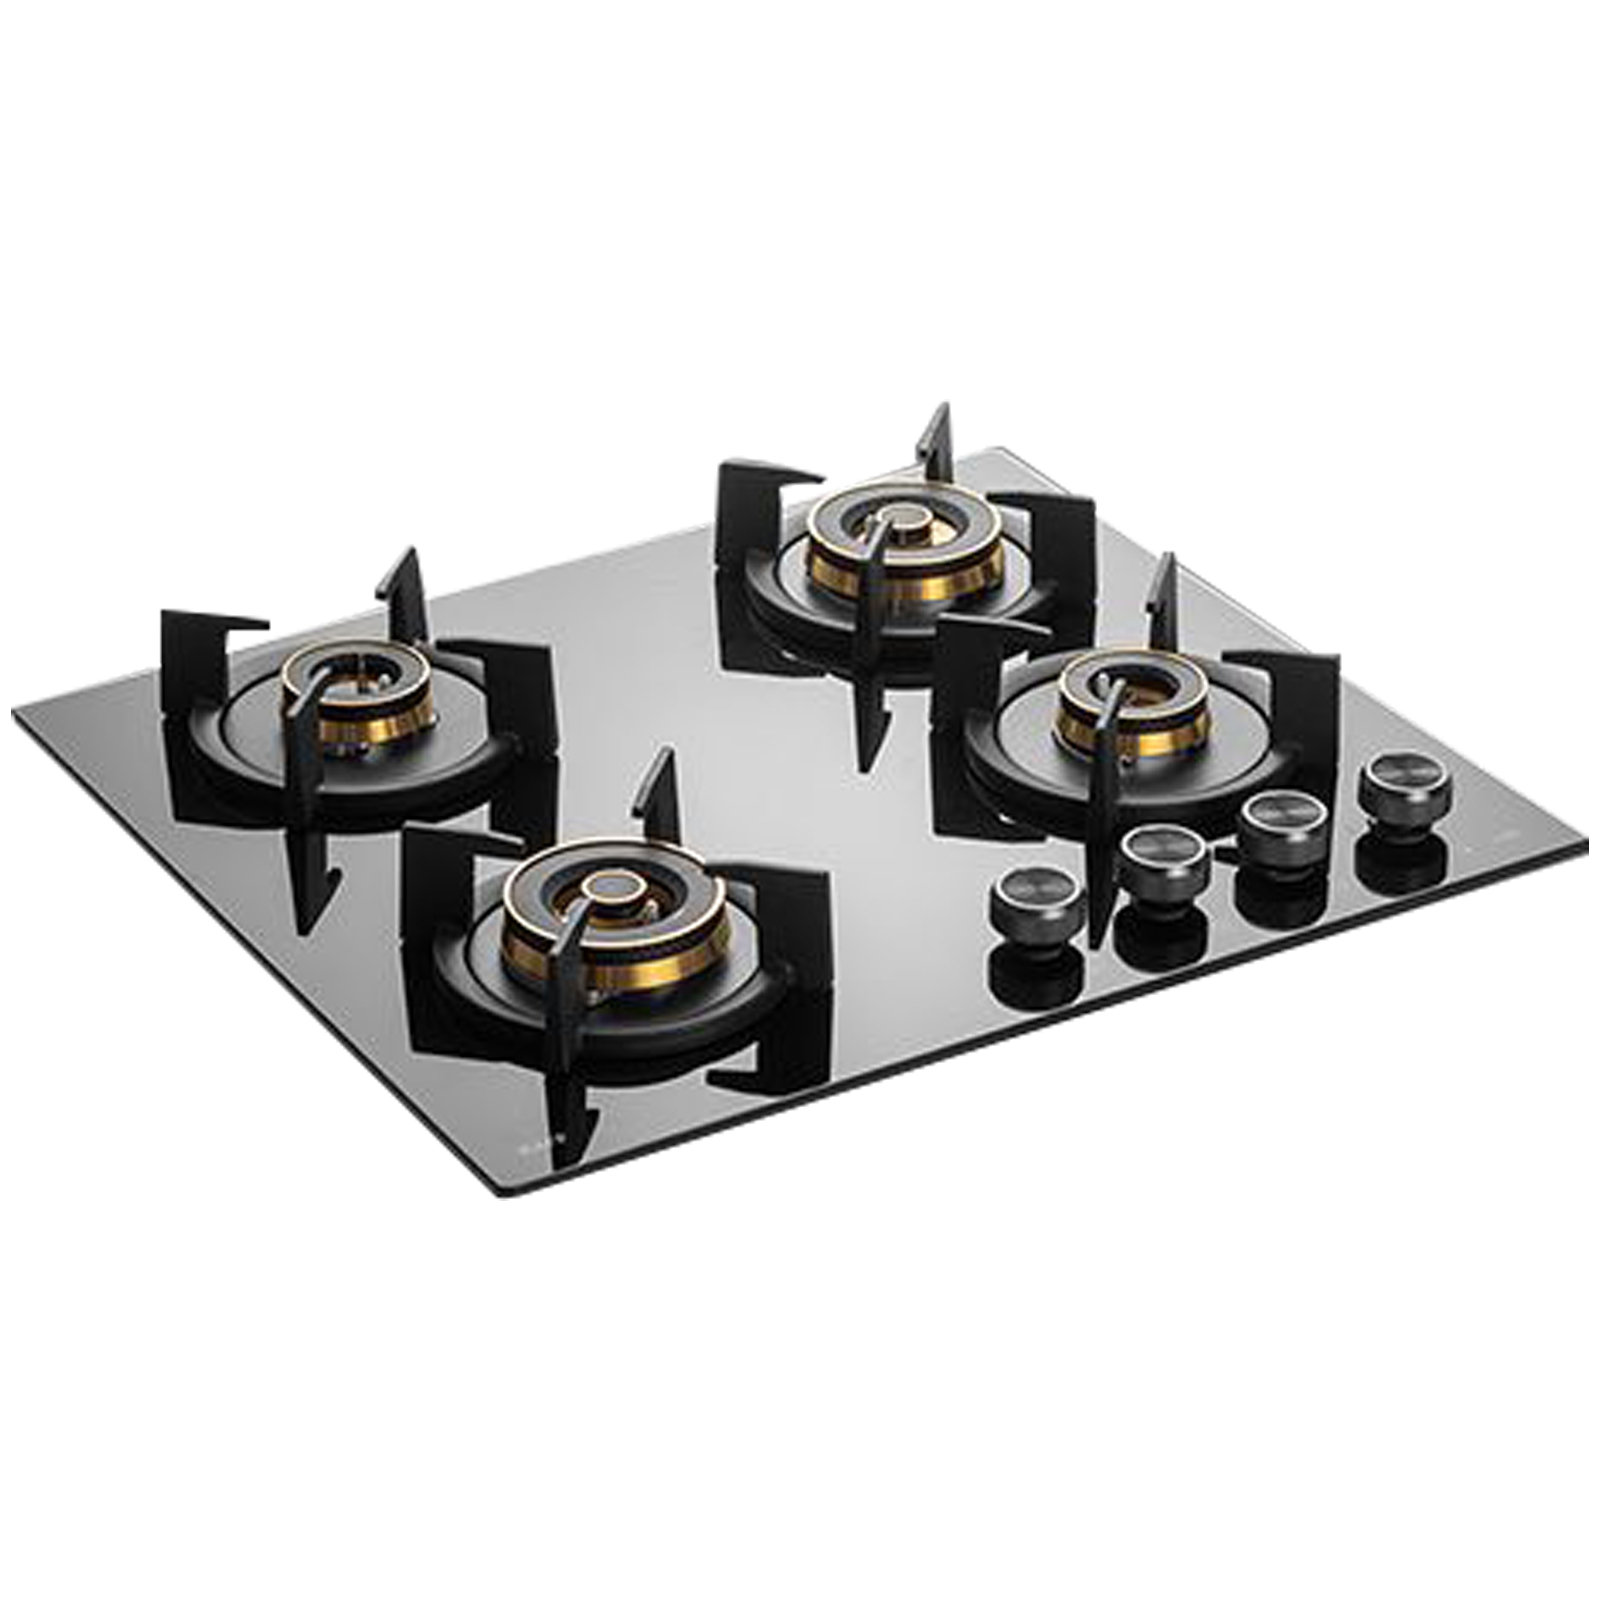 KAFF 4 Burner 8mm Thick Tempered Glass Built-in Gas Hob (Heavy Duty Cast Iron Pan Support, INF604, Black)_1